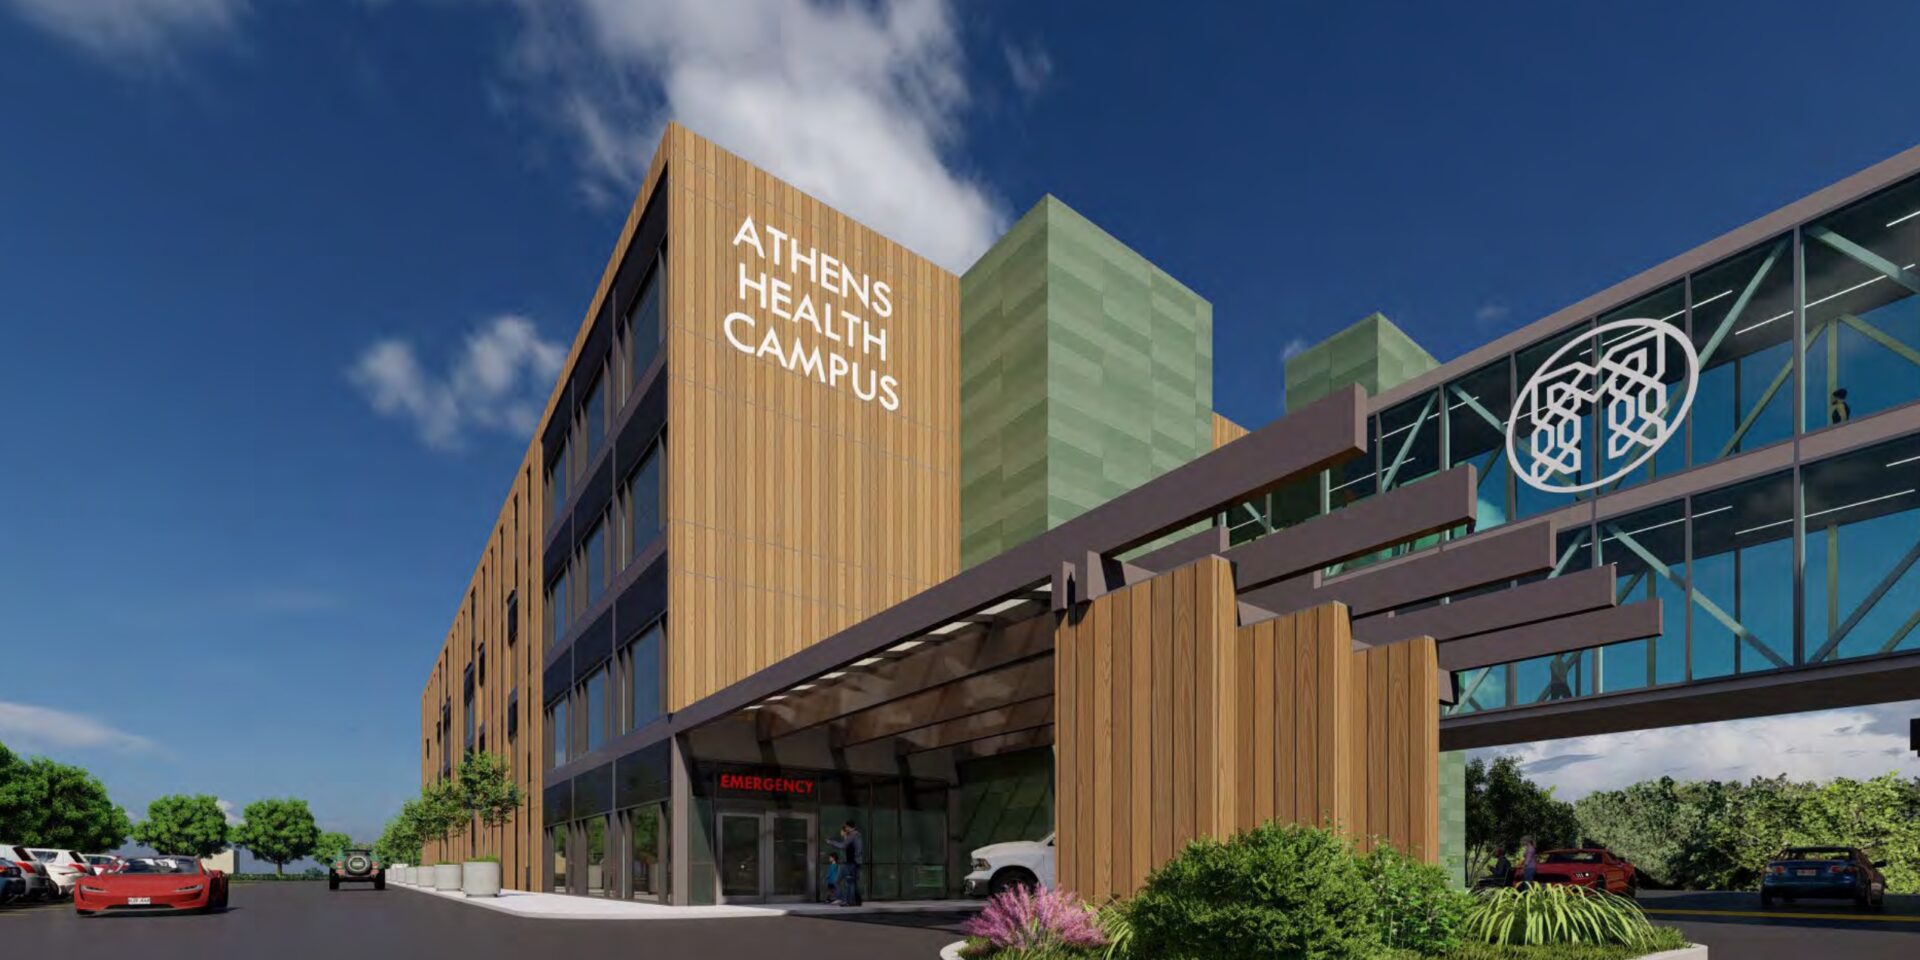 A rendering of the entrance to a hospital.